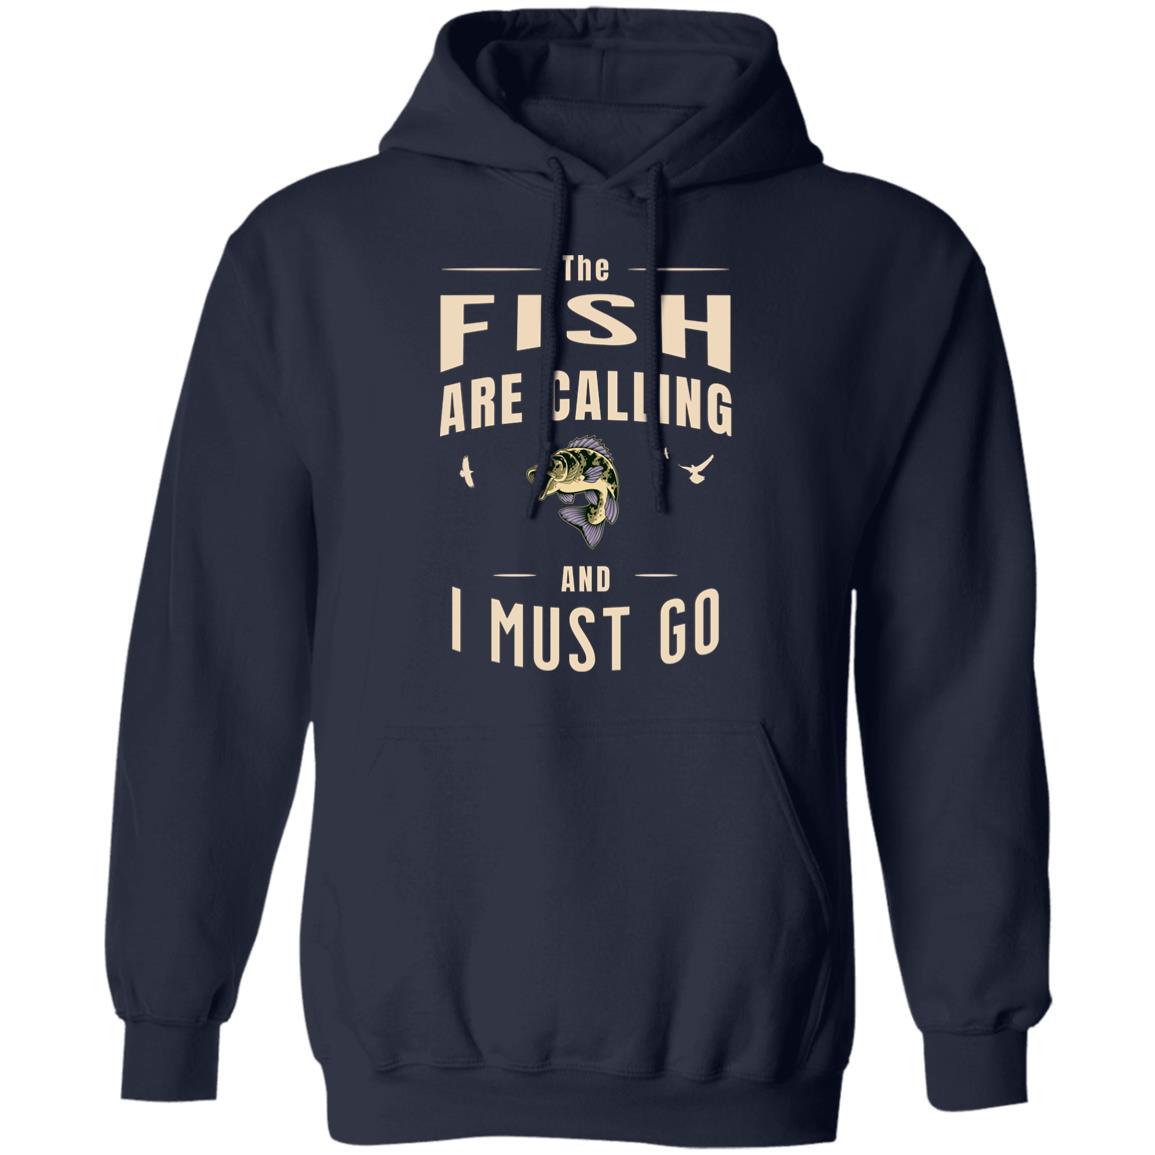 The fish are calling and i must go-hoodie k navy